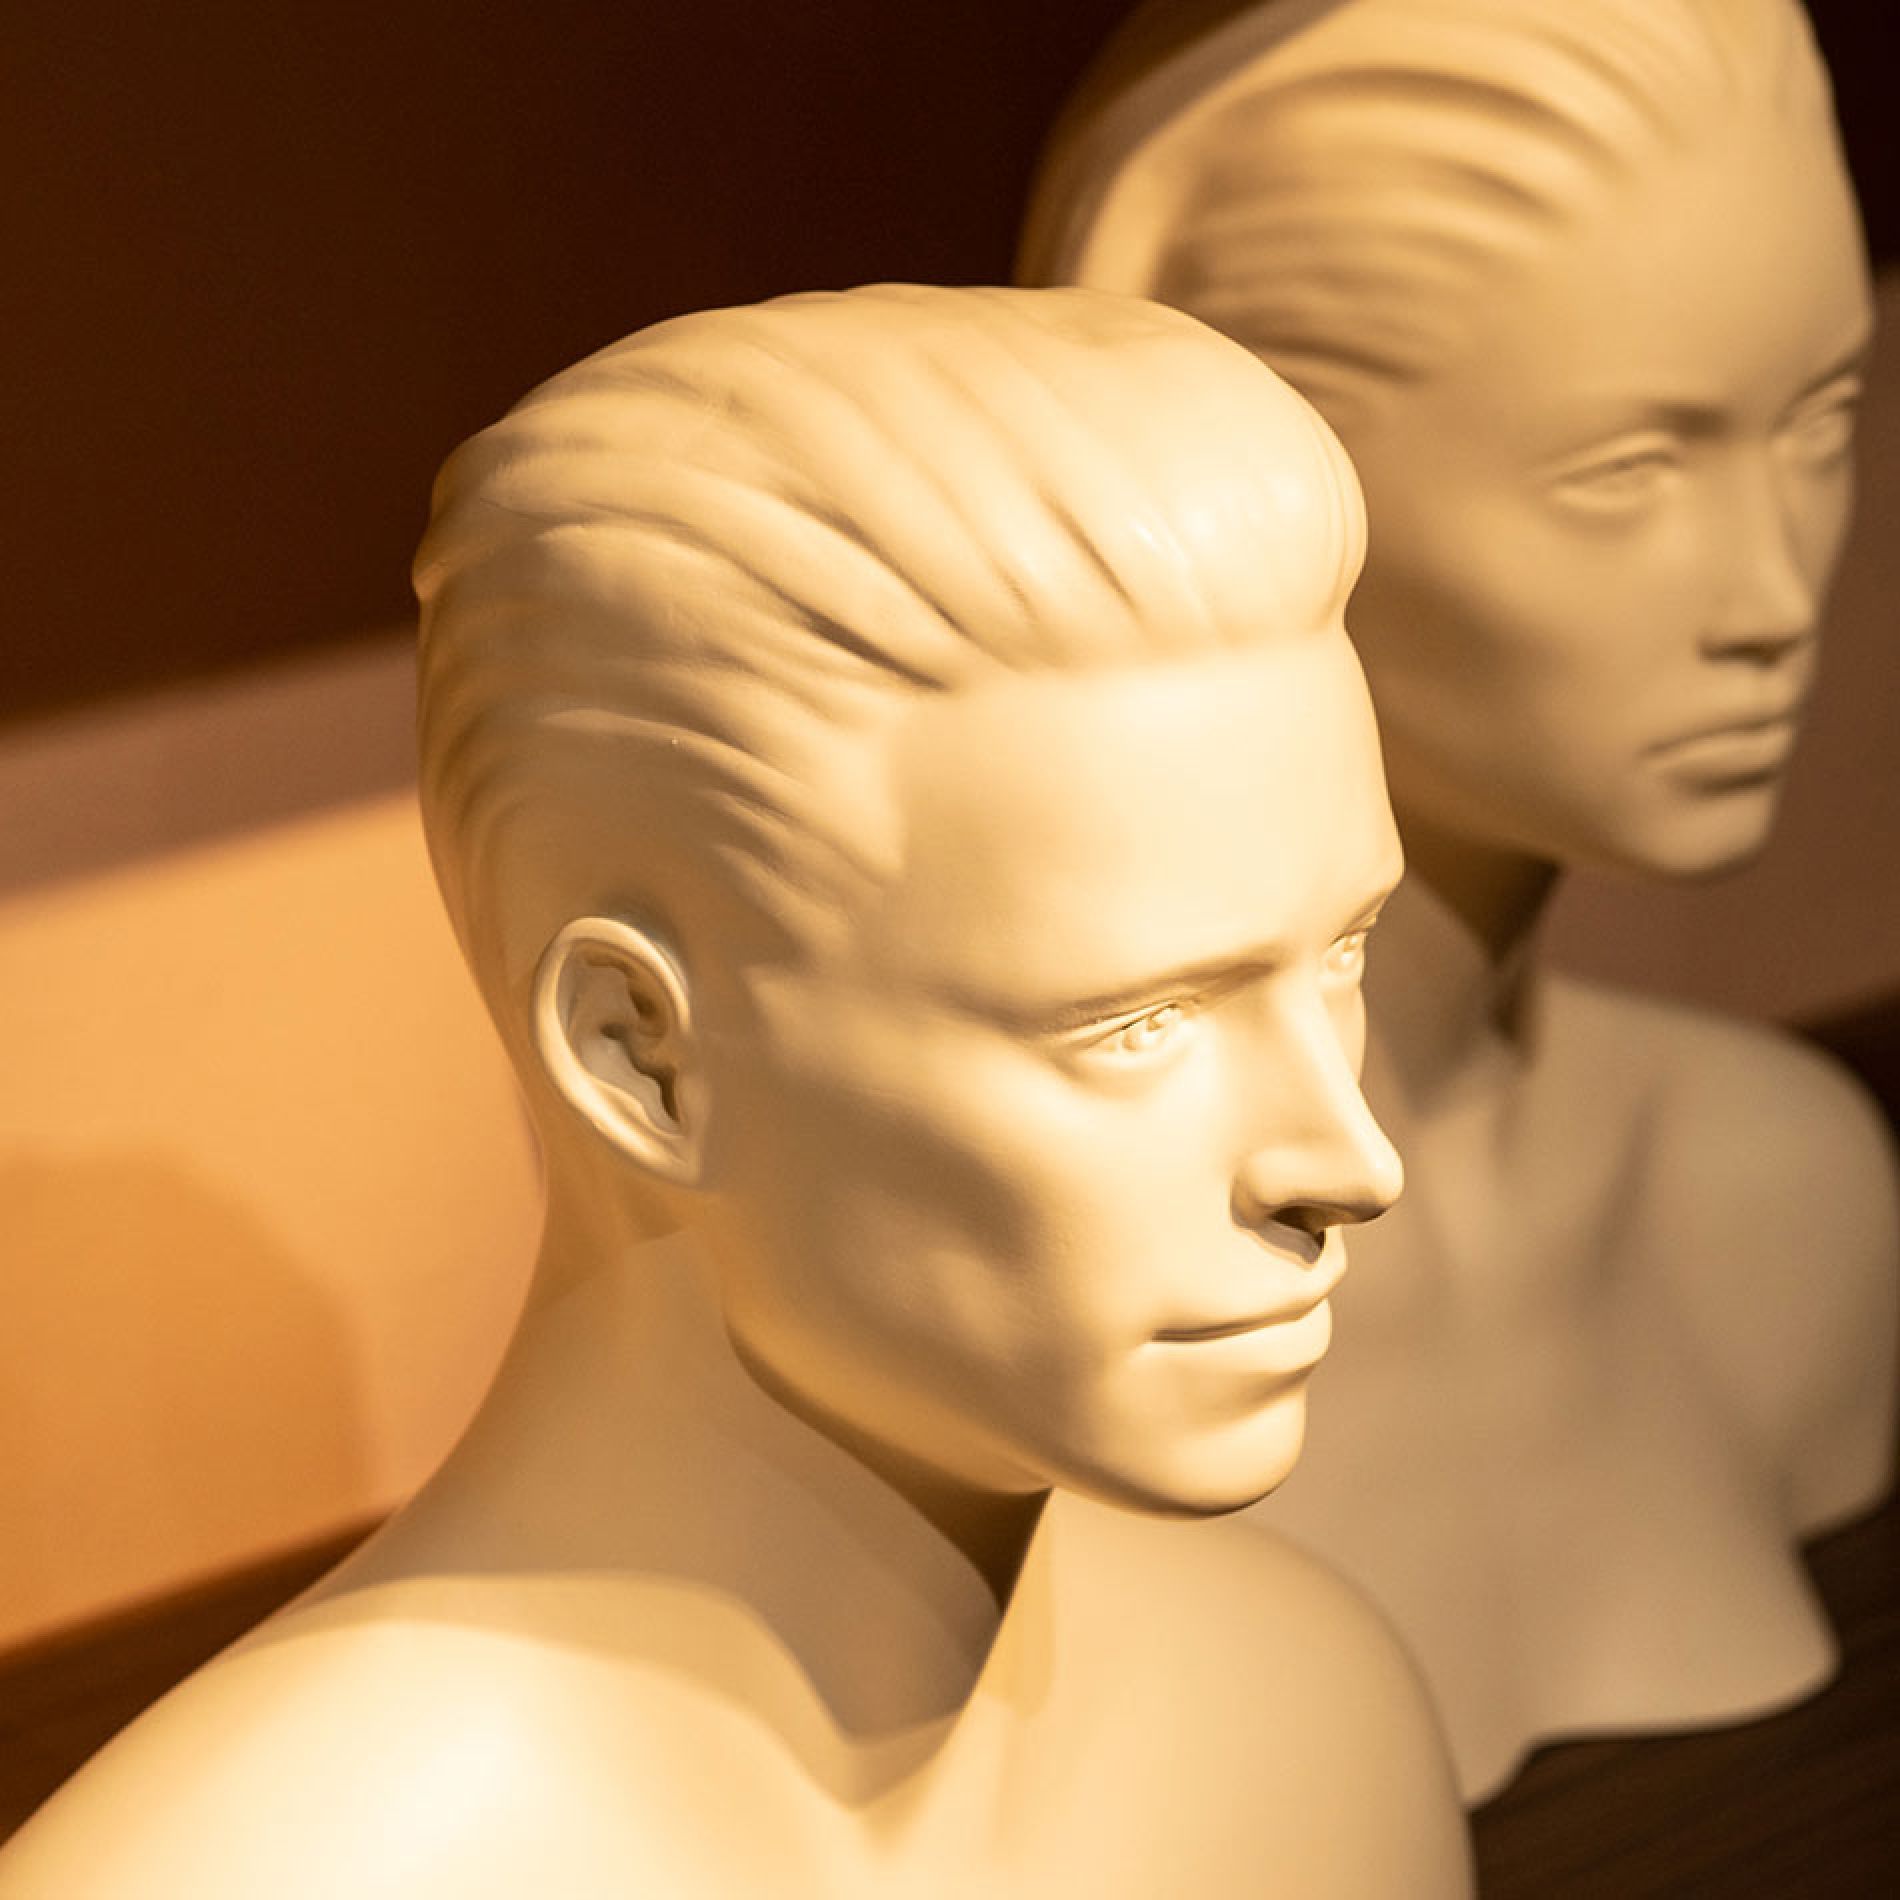 Male Mannequins Gallery Image